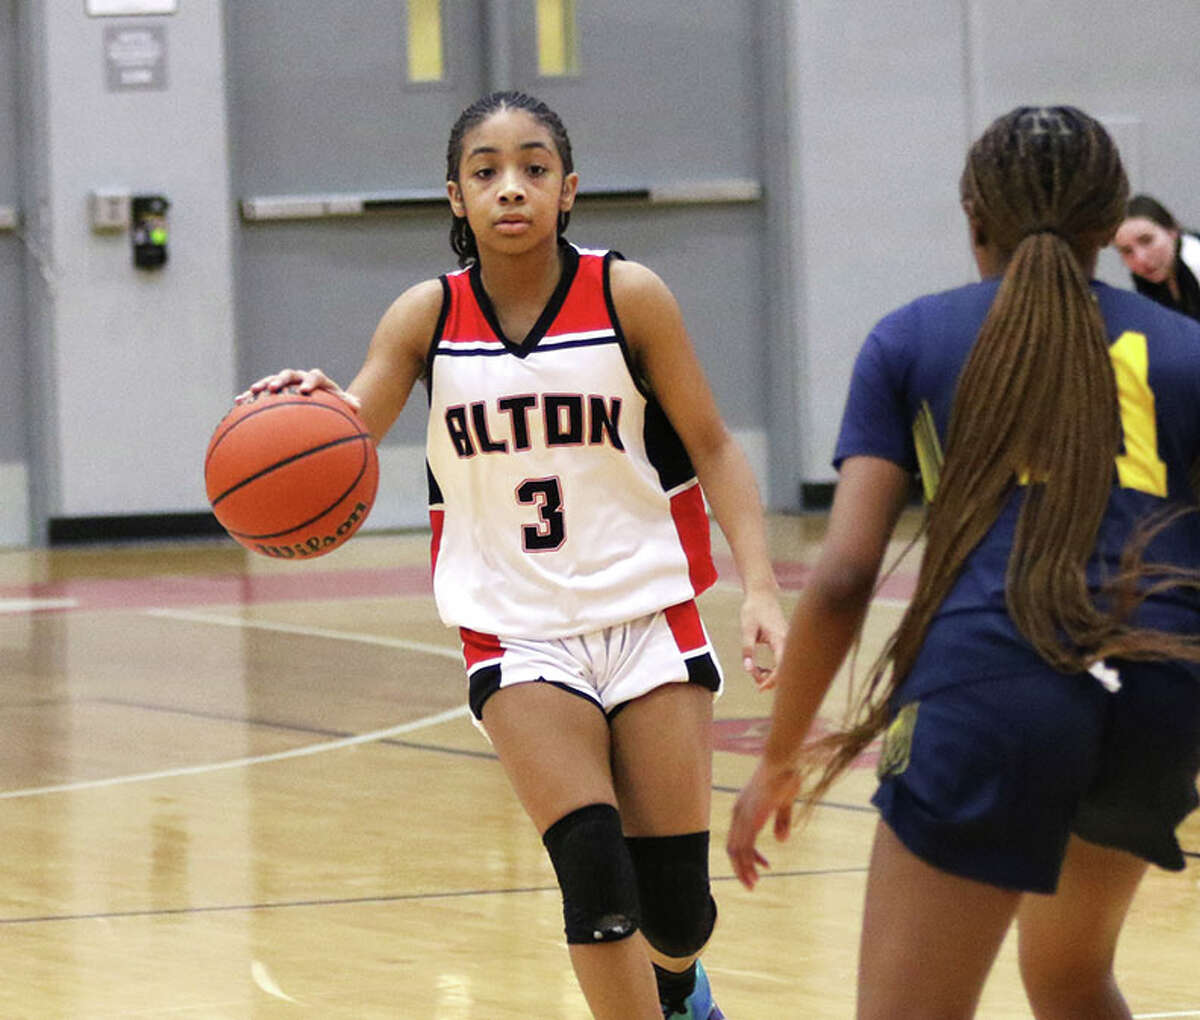 Alton's Kiyoko Proctor (3) runs offense in Thursday's SWC game against O'Fallon at Alton High in Godfrey. The Redbirds stayed unbeaten at 8-0 on Saturday with a shootout win over Lutheran St. Charles in Belleville.